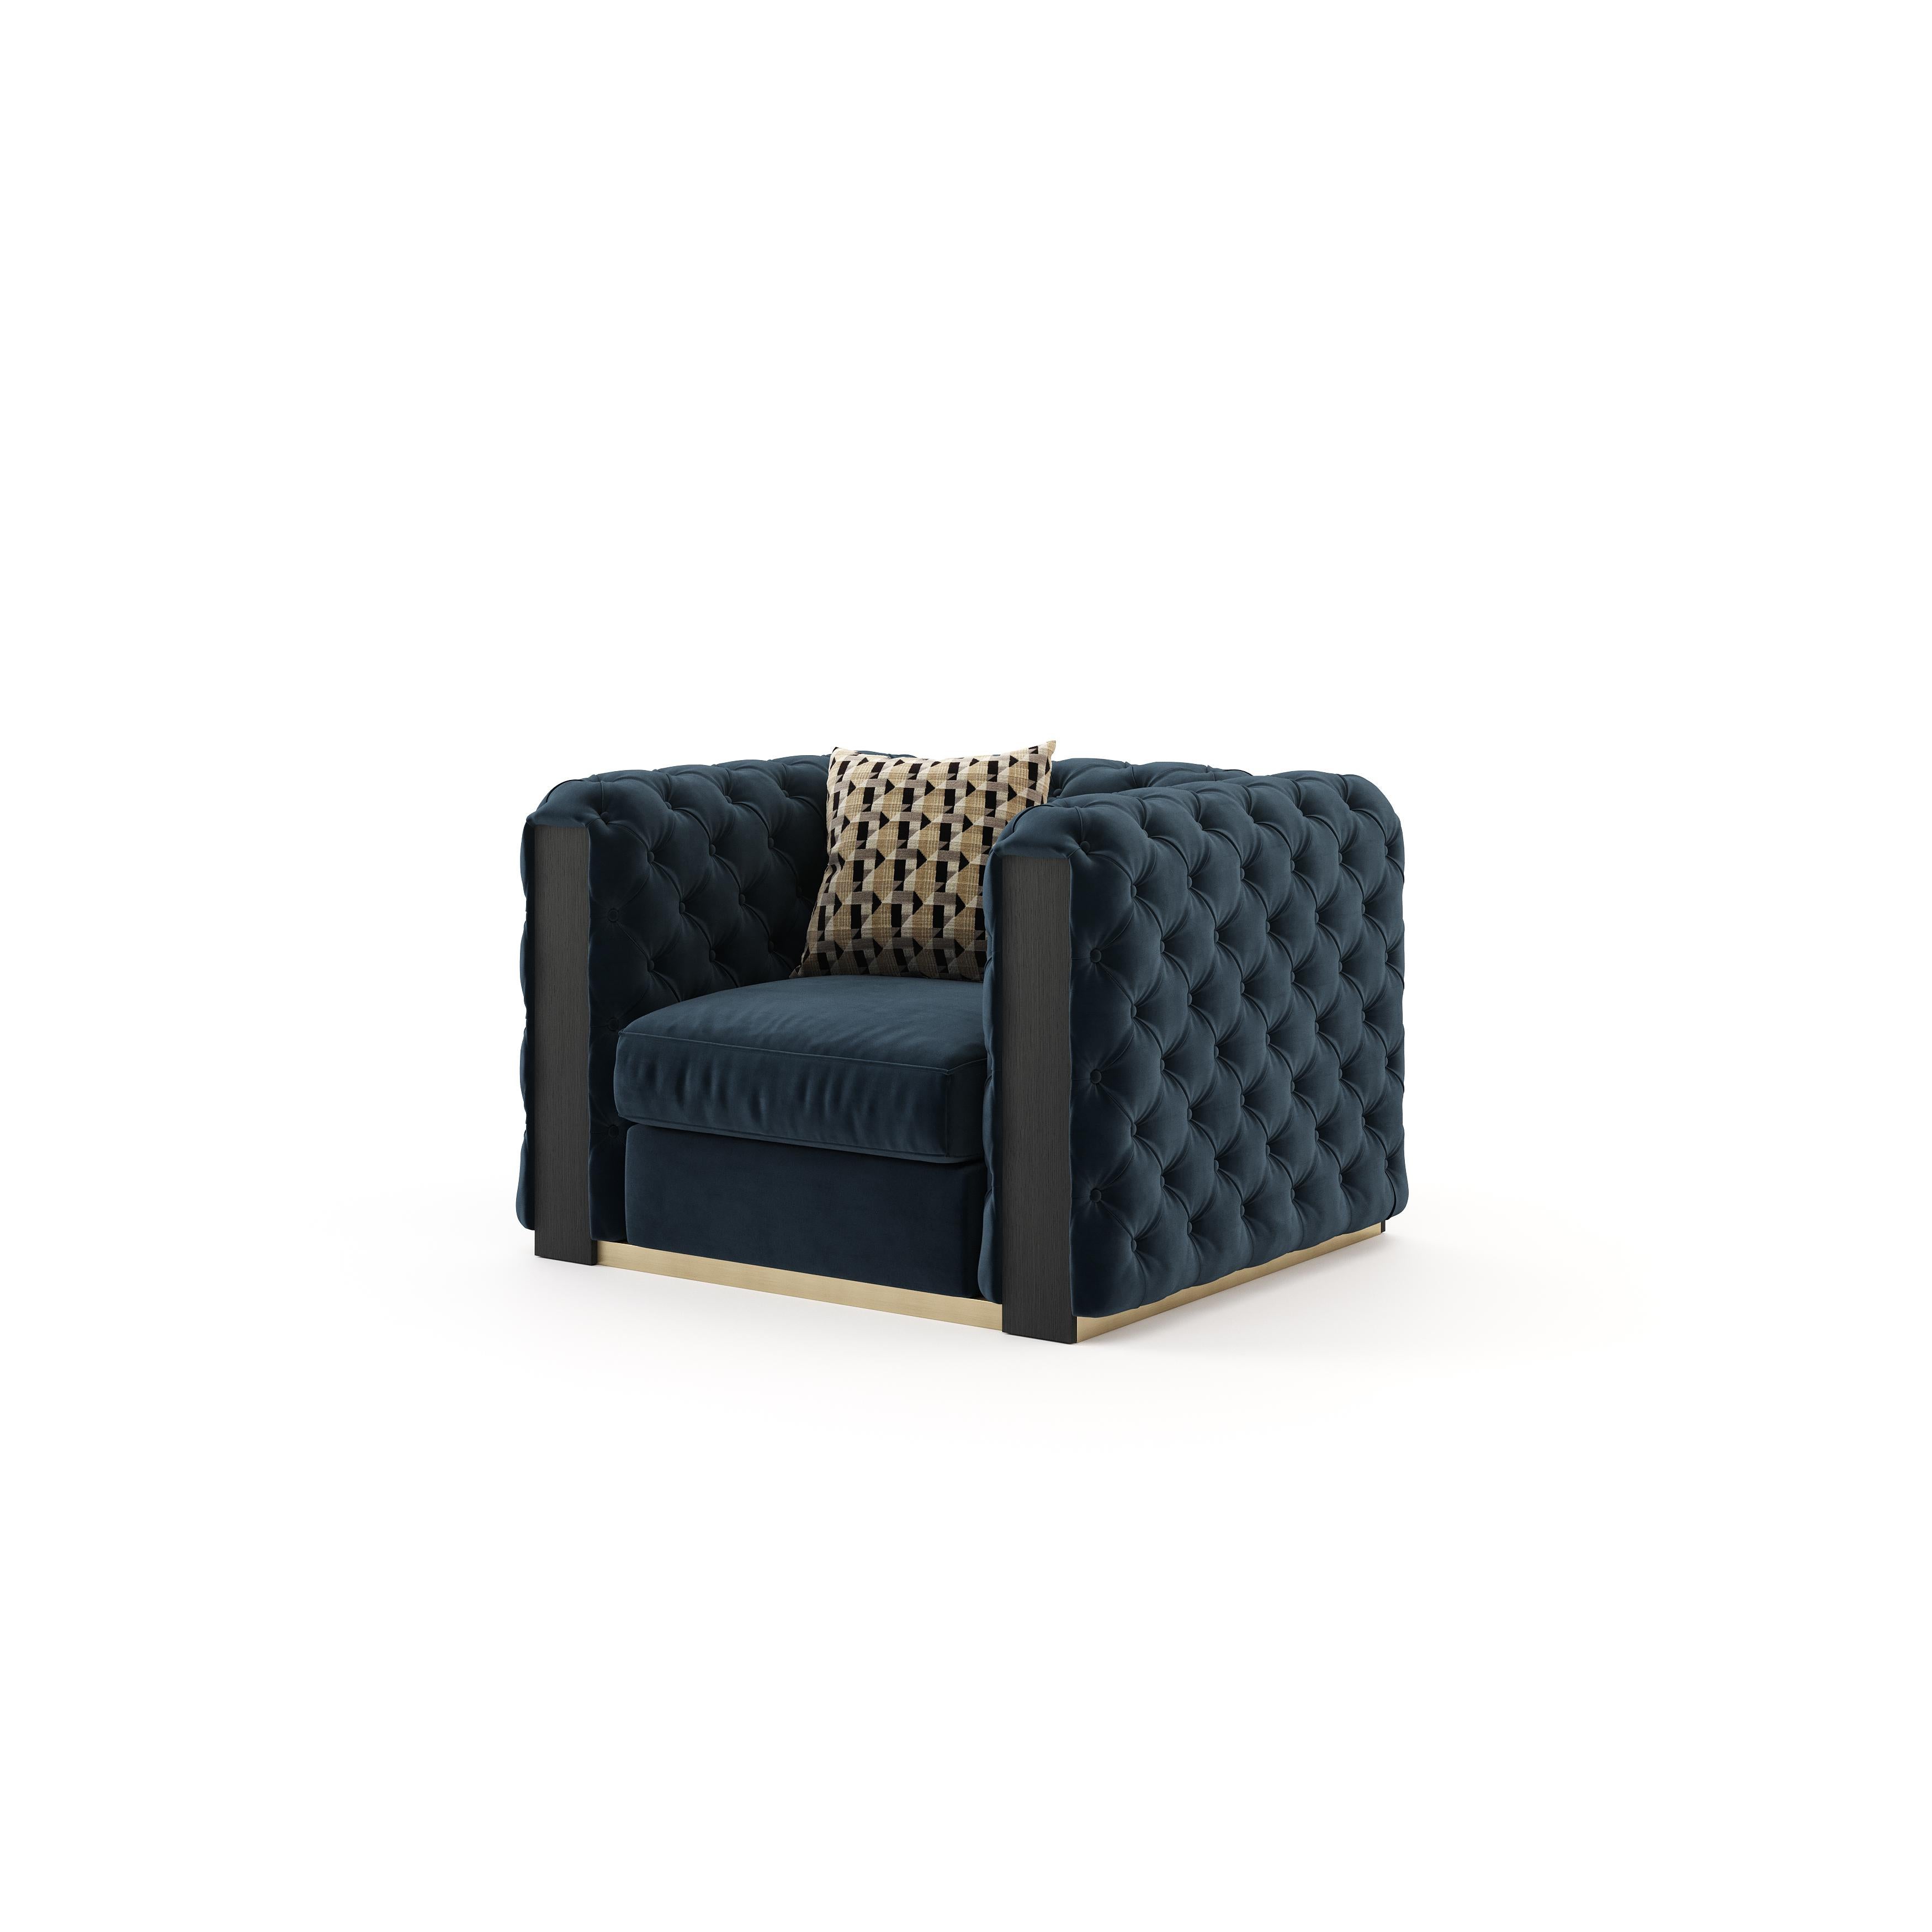 Through its unique back, designed with the deep buttoning technique, Jean Sofa small is an impressive piece for desirable living rooms. This upholstered sofa is the perfect addition to cosy retreats and welcoming open spaces. Jean makes the most out